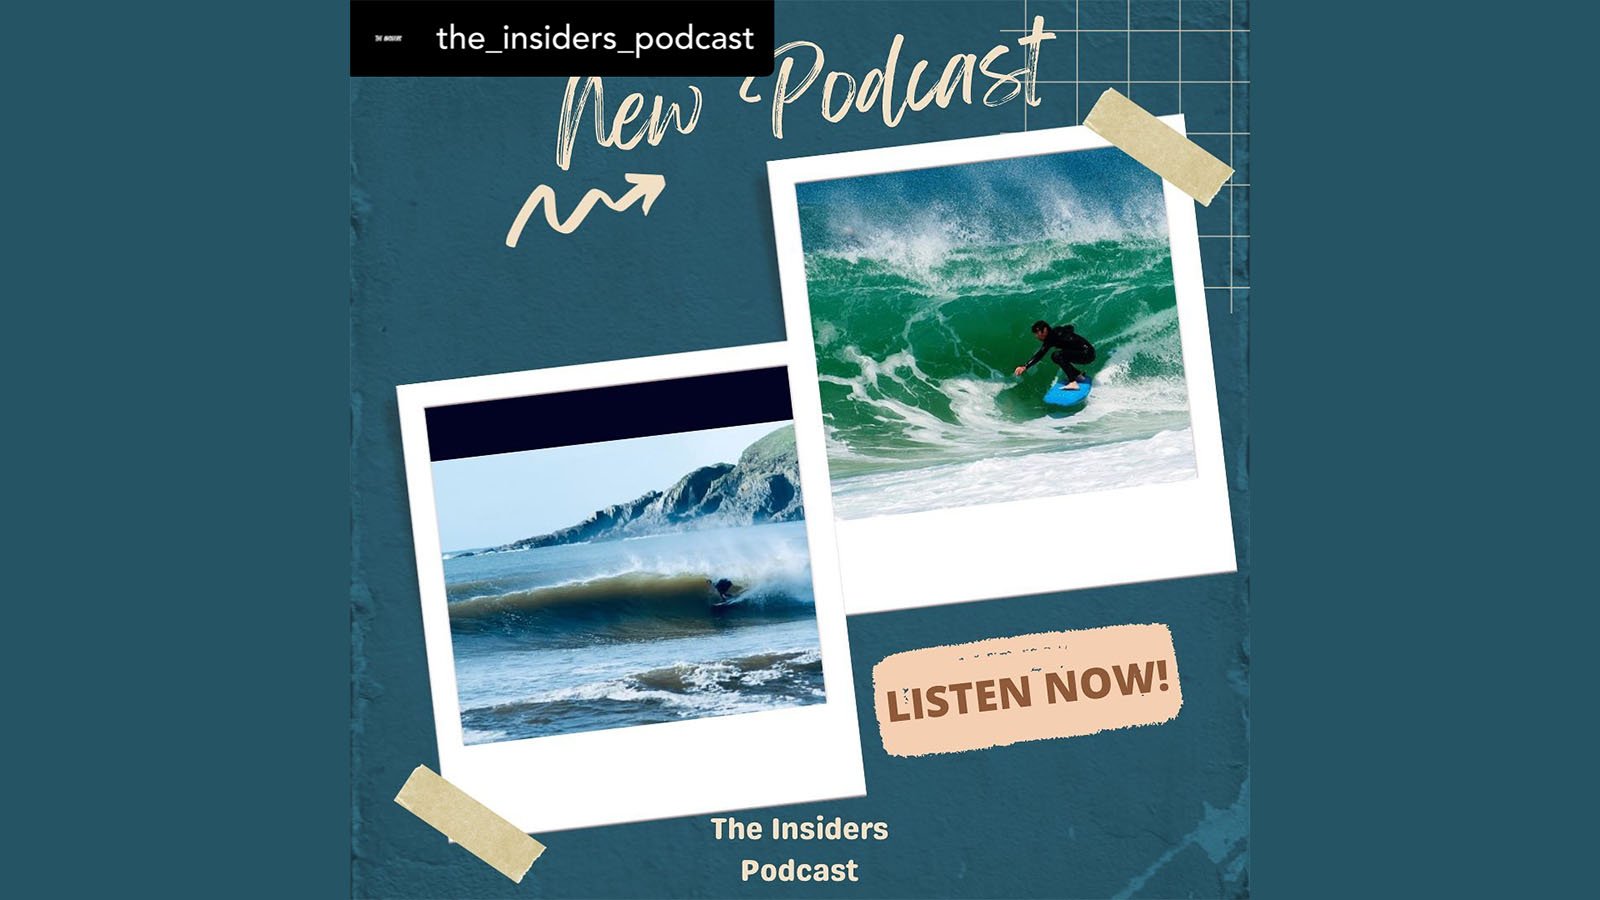 The Insiders Podcast